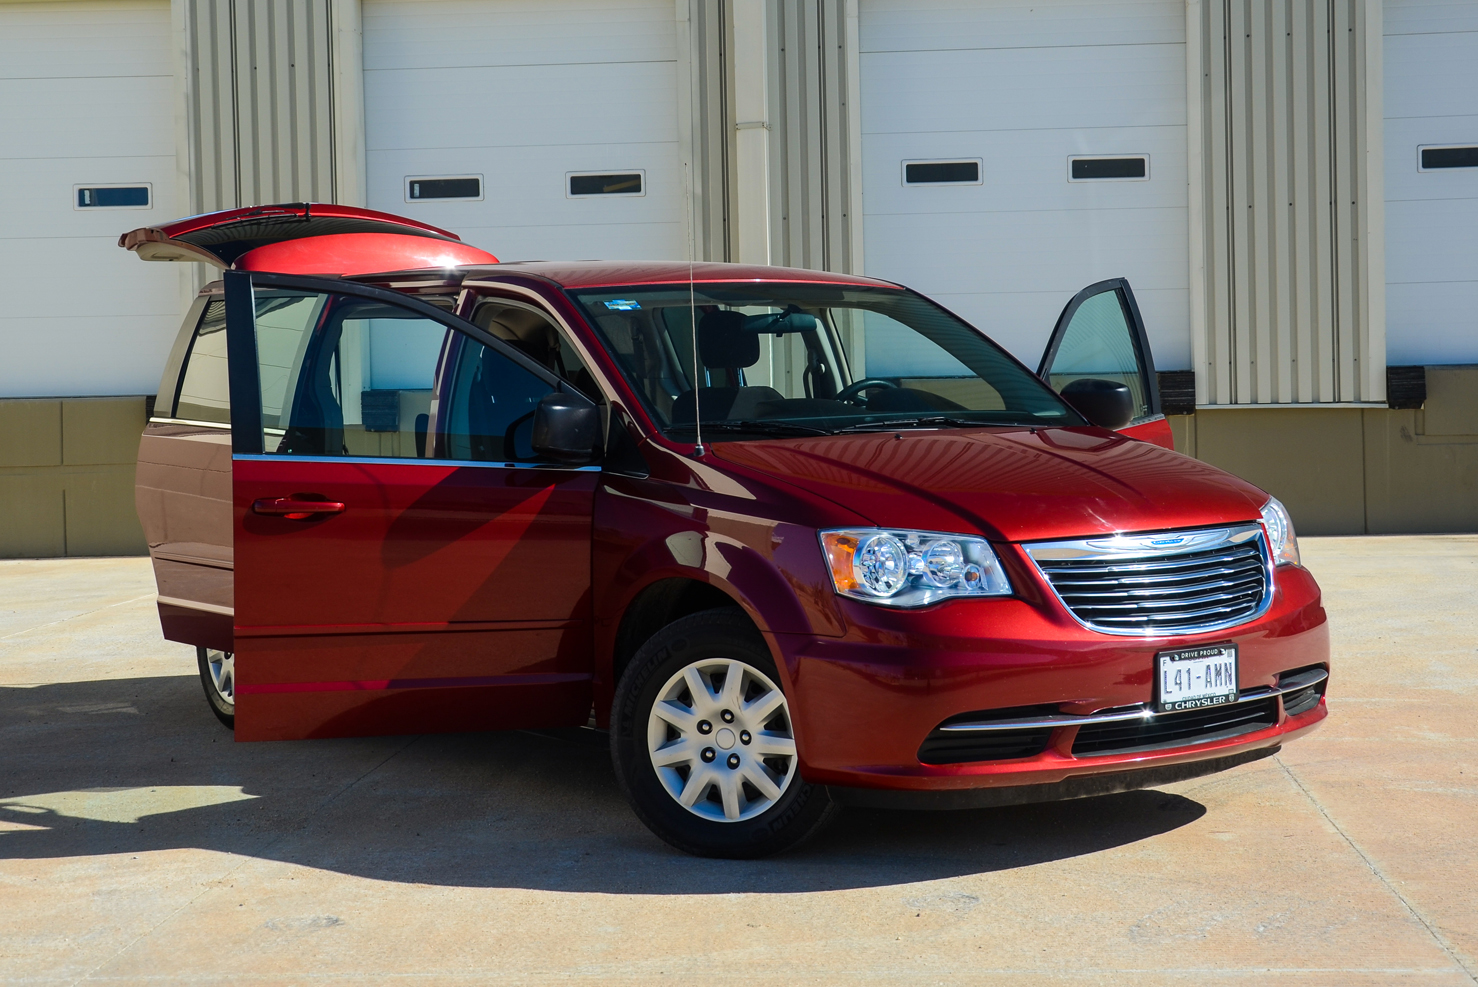 Chrysler Town & Country (Vans Familiares)